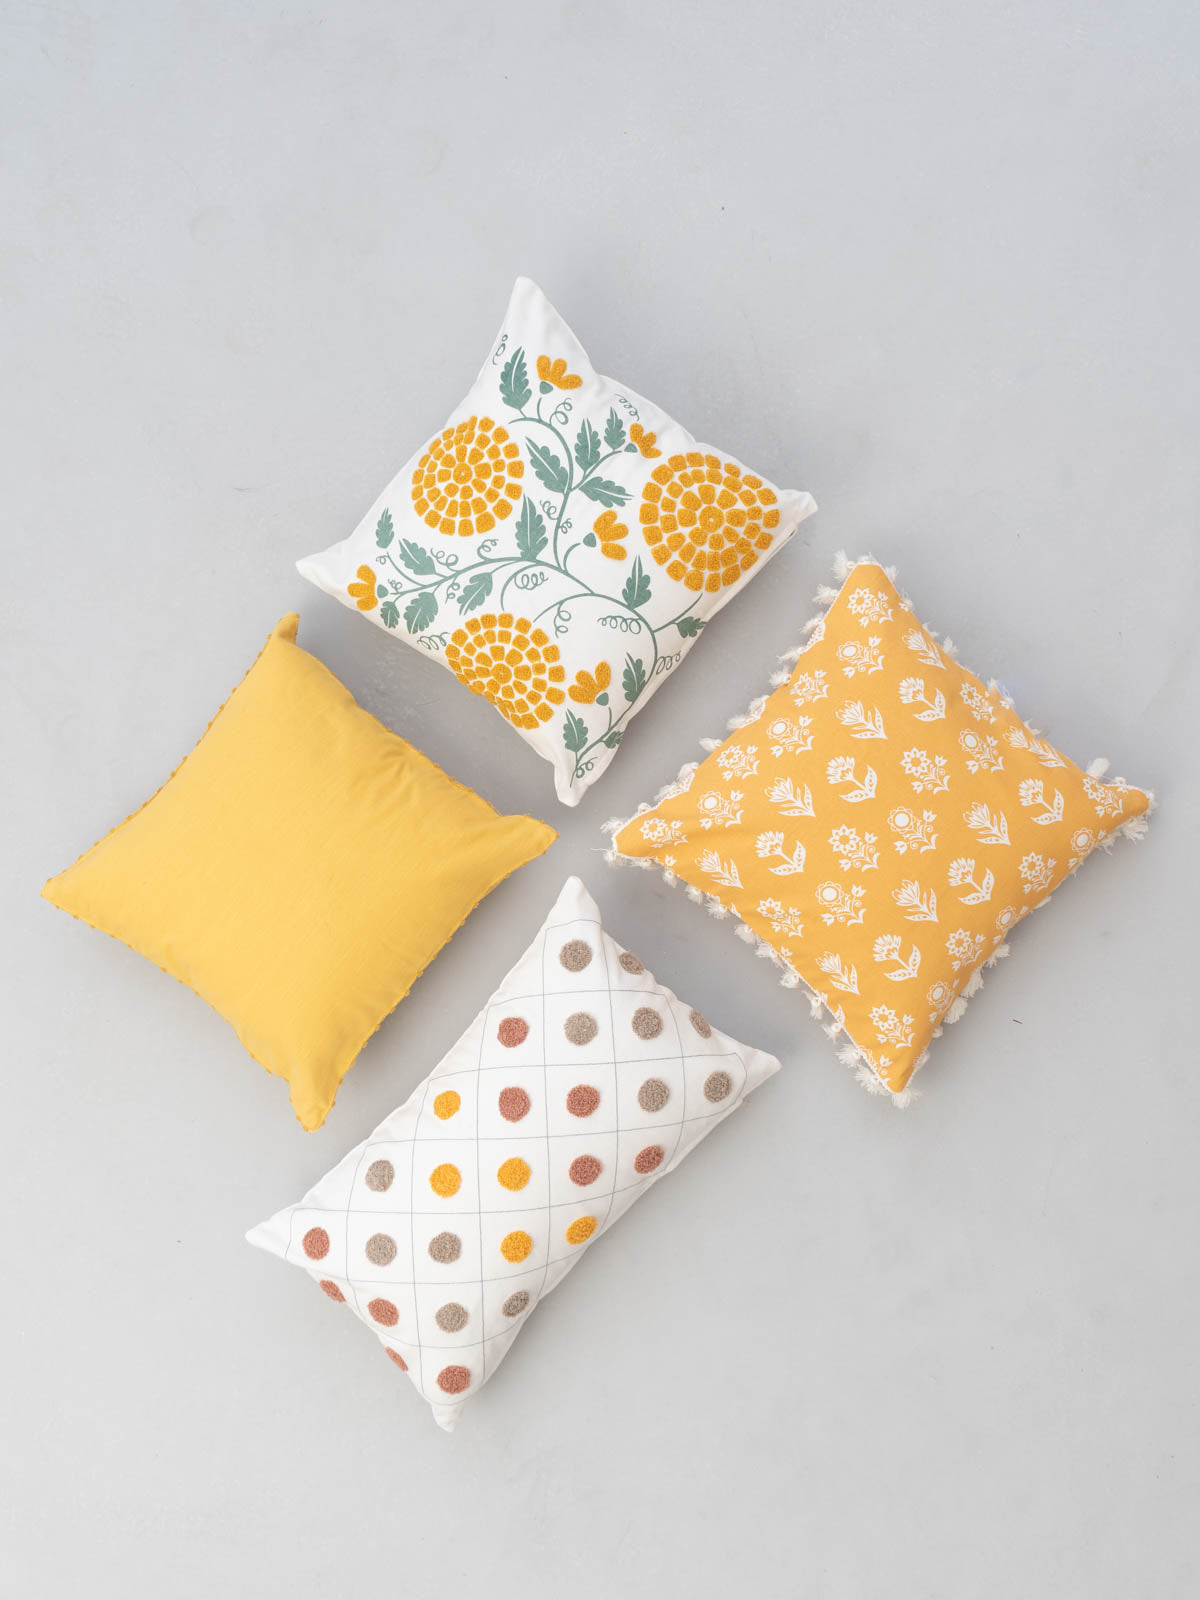 Dahlia Yellow, Mystique Marigold, Dainty Dots Yellow , Solid Mustard Set Of 4 Combo Cotton Cushion Cover - Yellow